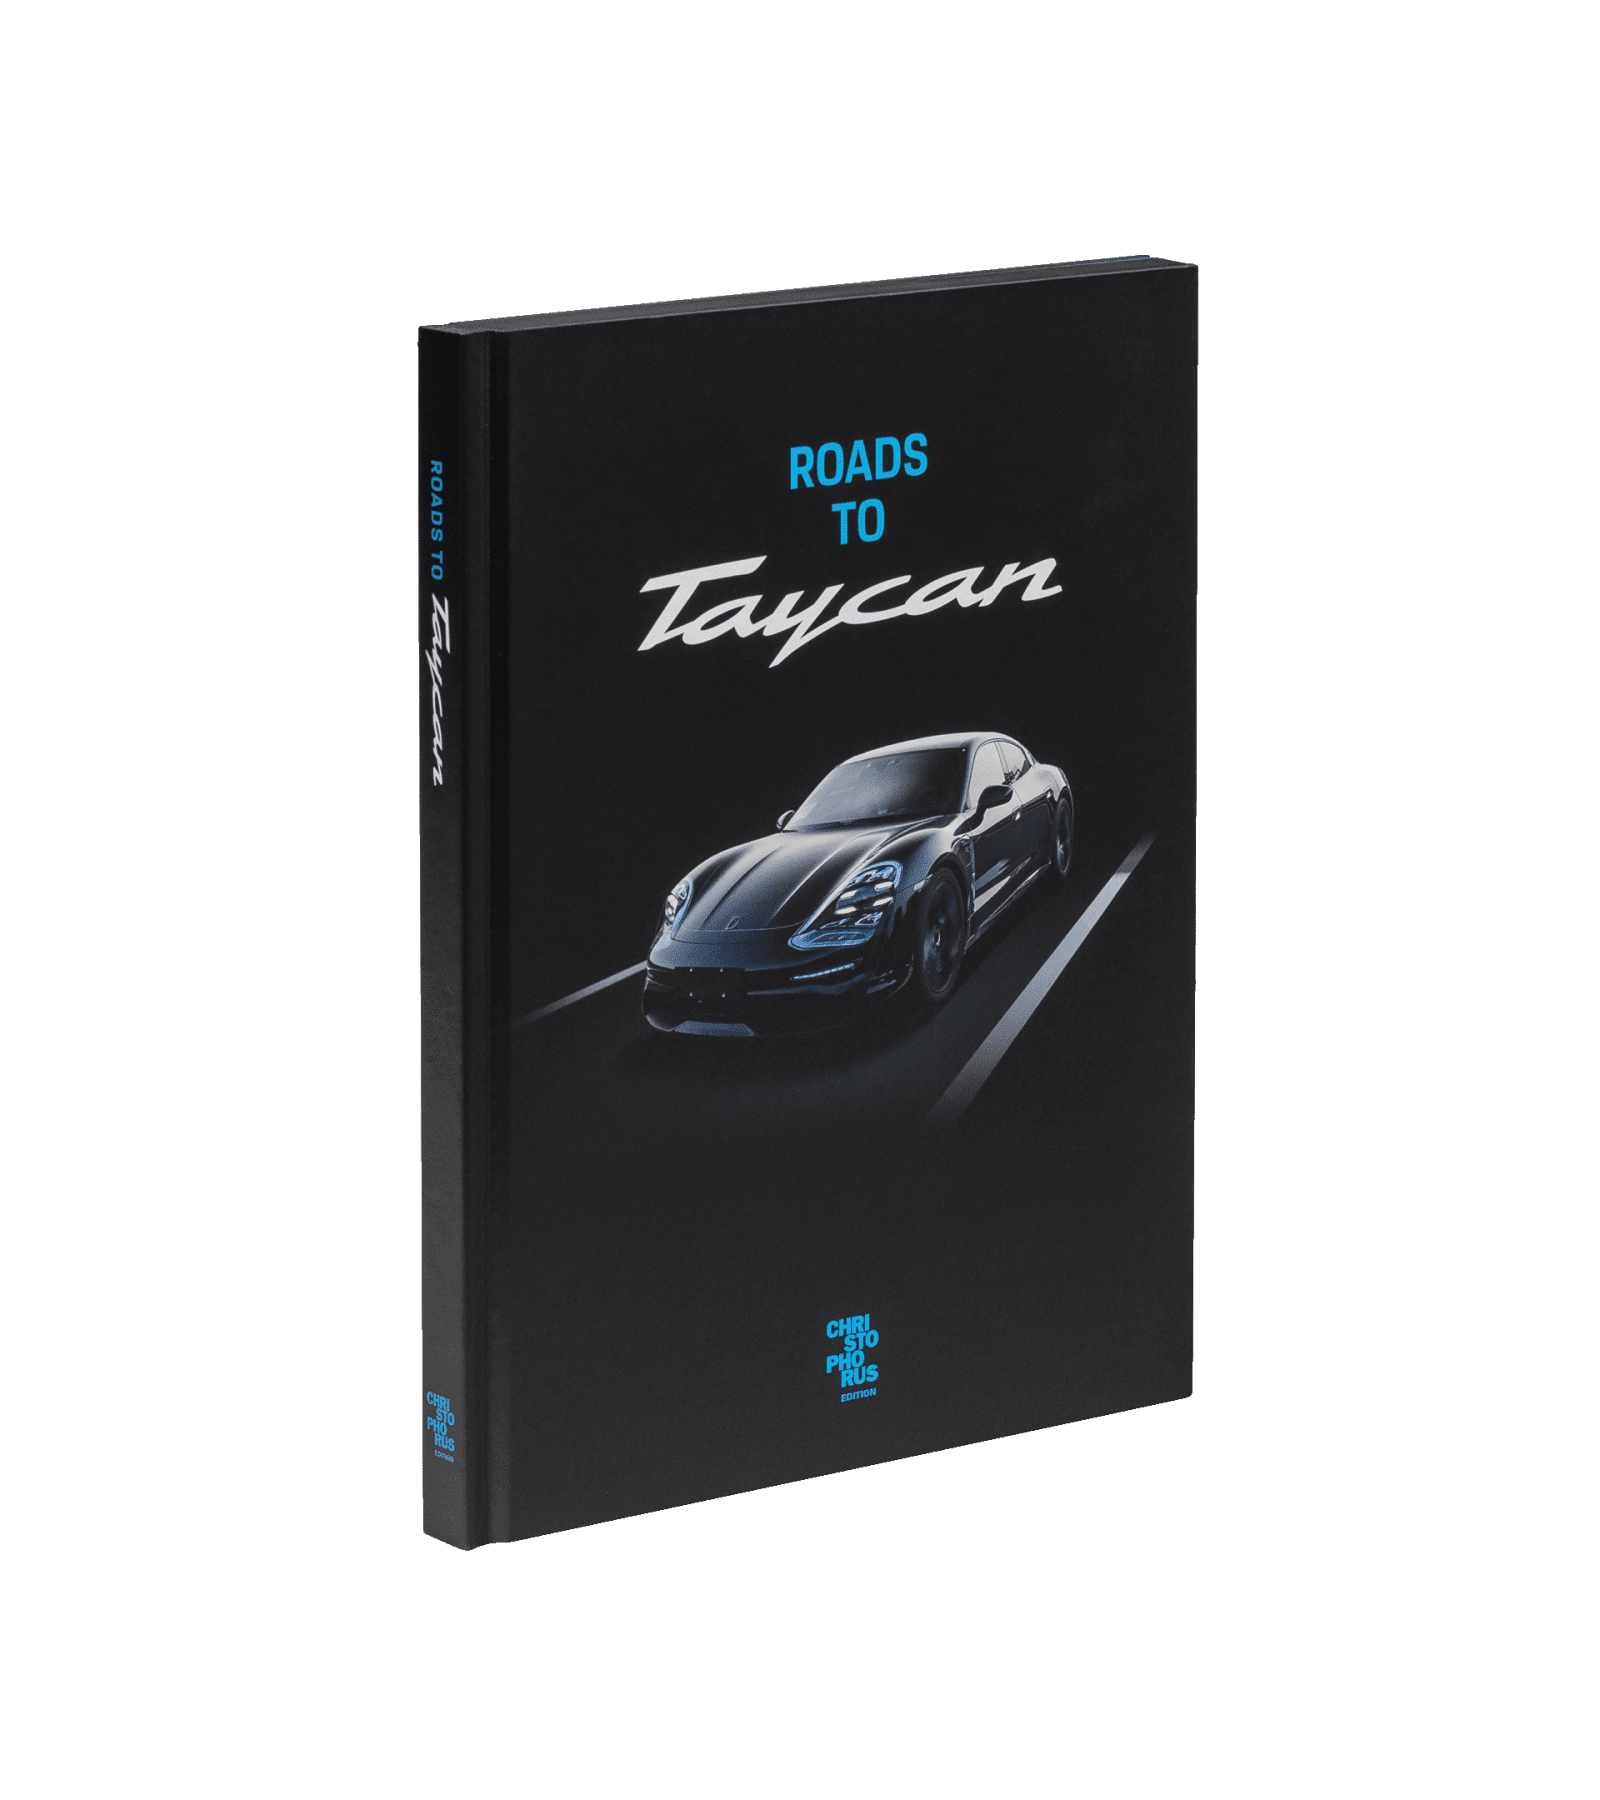 Porsche Offers a Taycan Coffee Table Book - Surprisingly Affordable